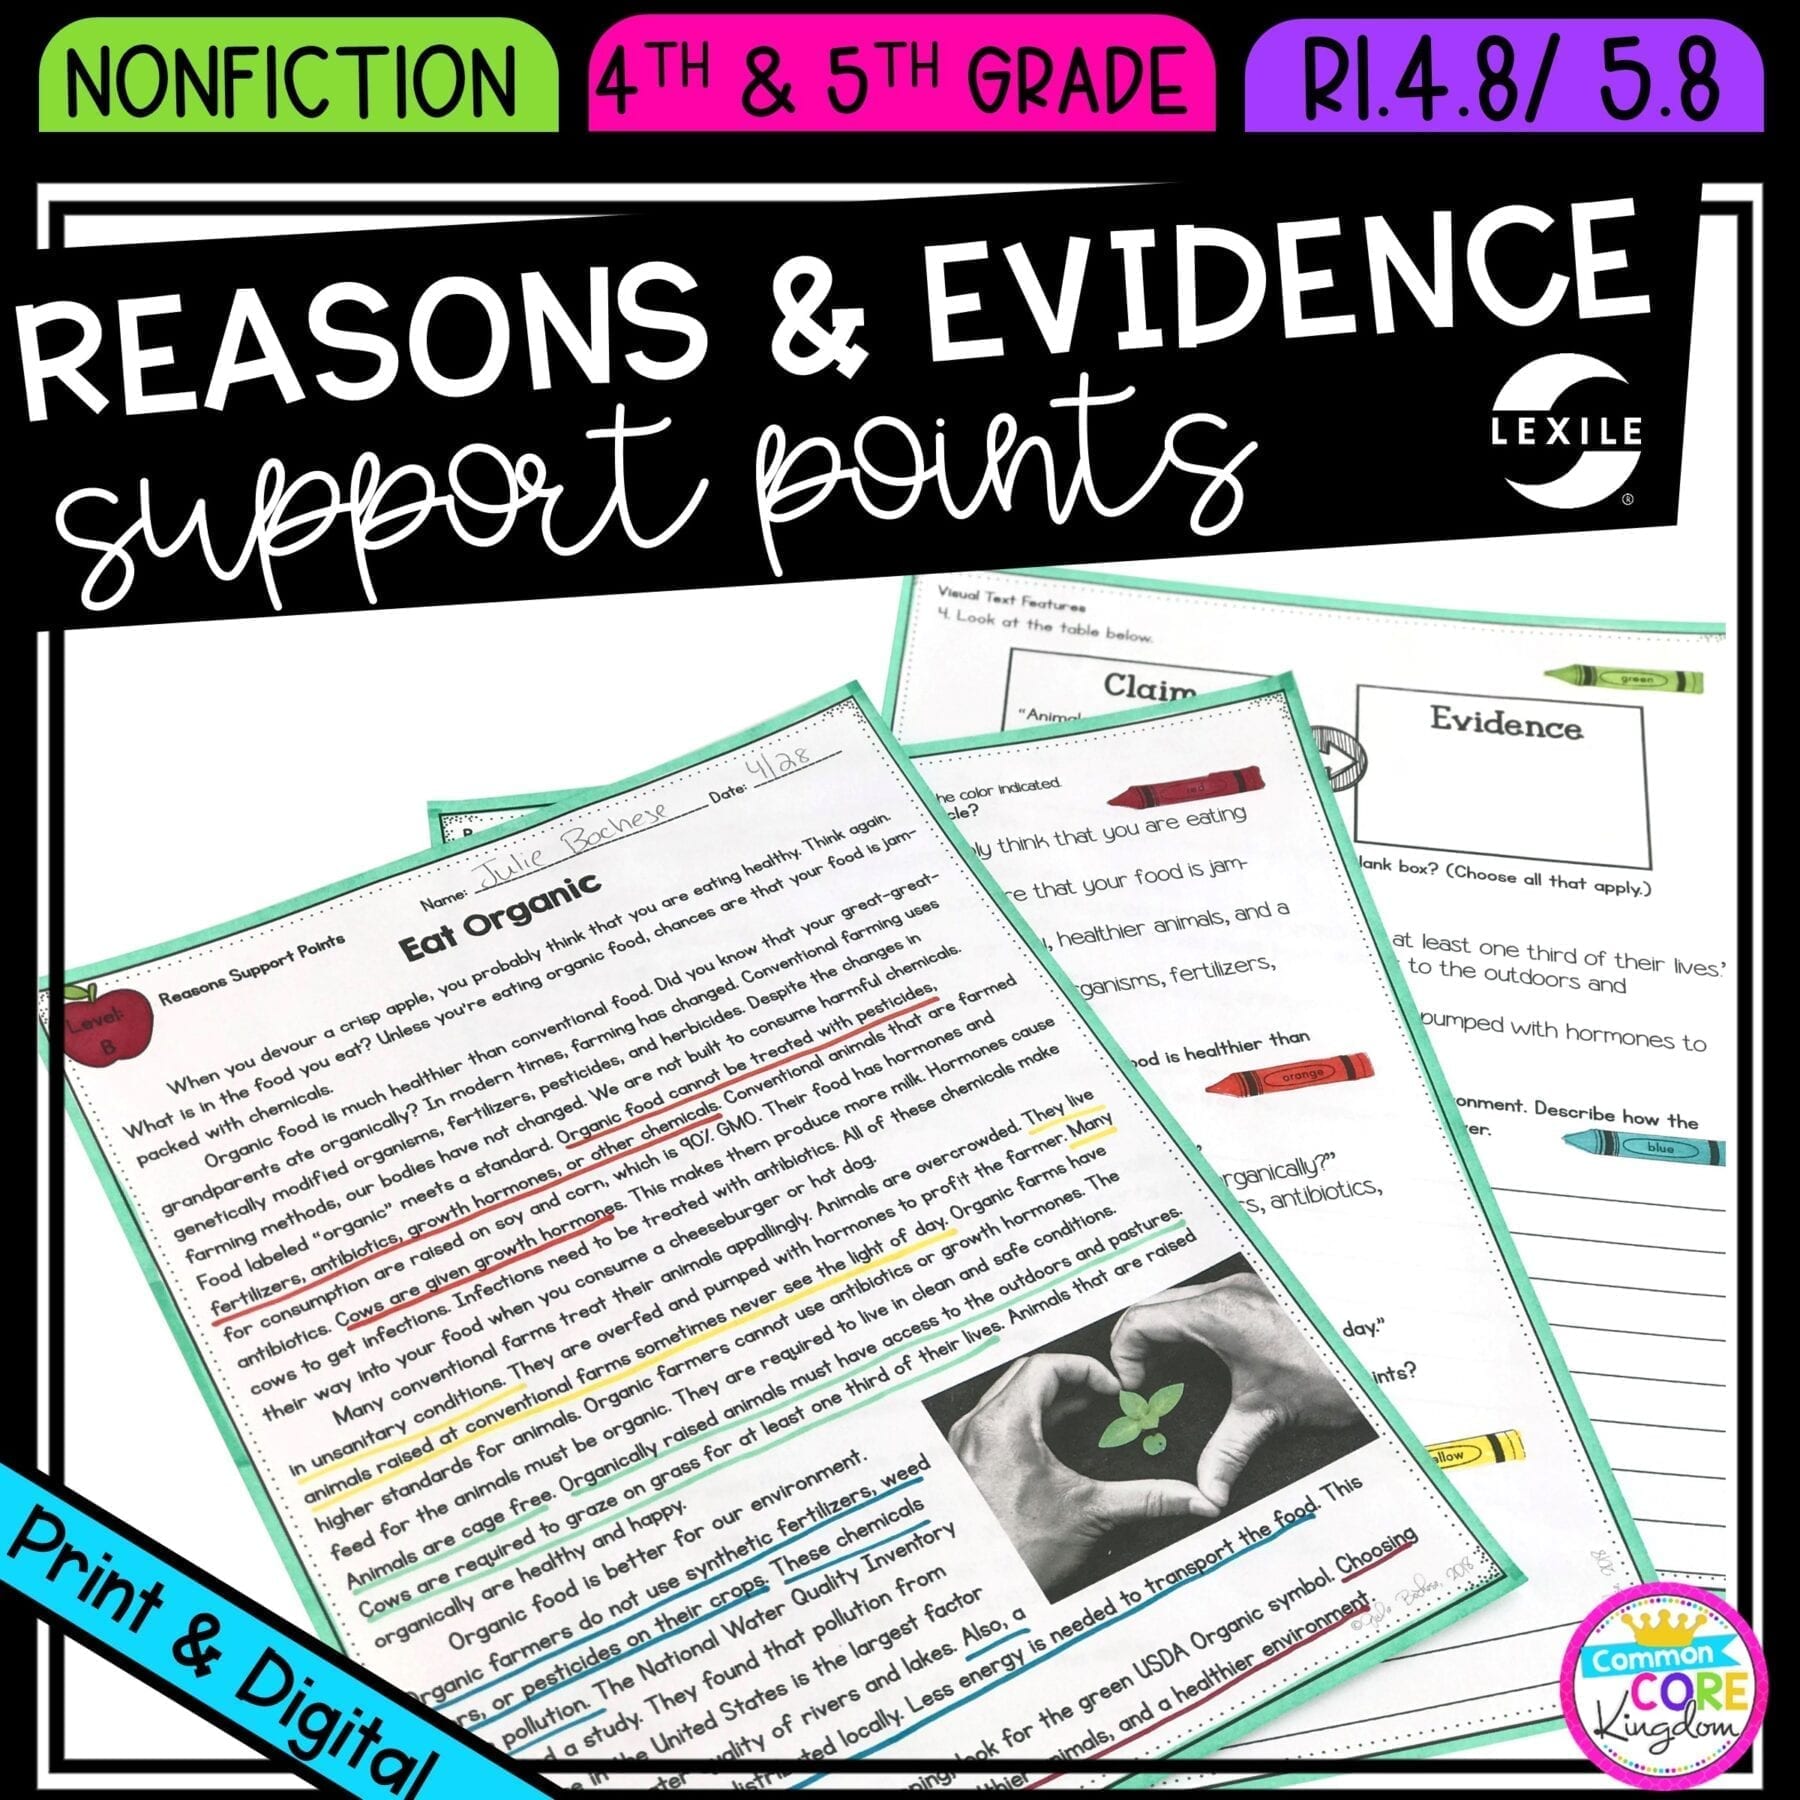 Reasons and Evidence Support Points for 4th & 5th grade cover showing printable and digital worksheets